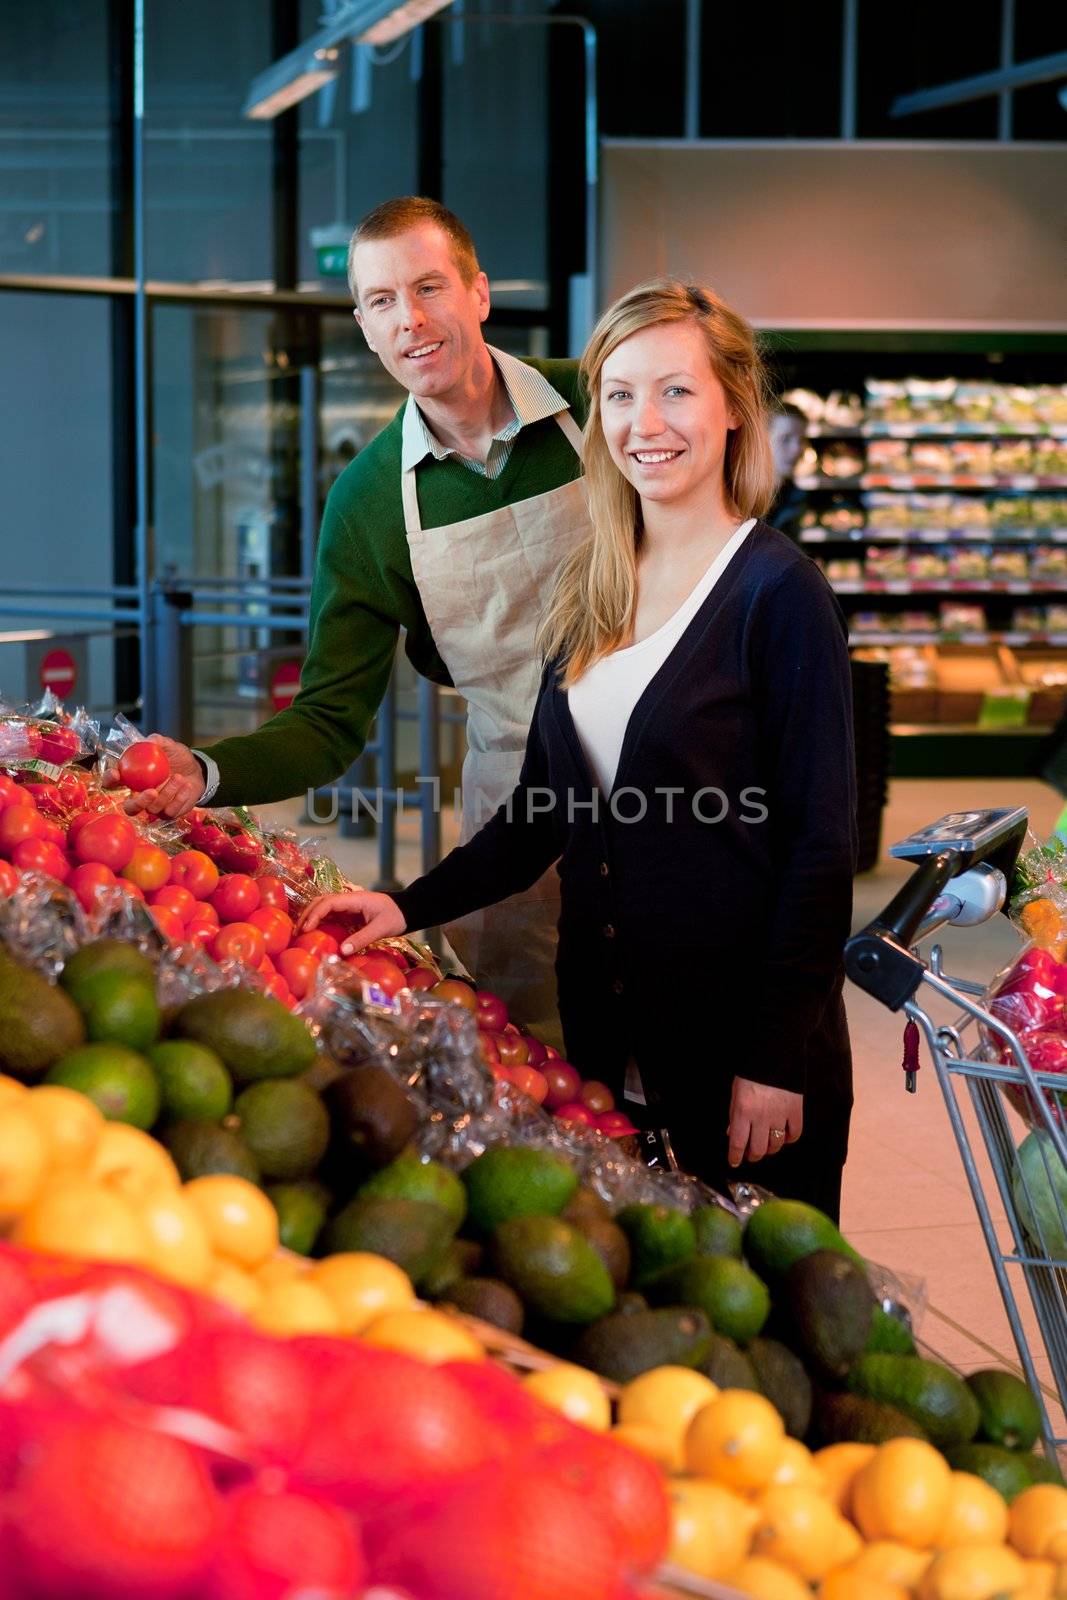 A woman buying fruit and vegetables at a supermarket, receiving help from a grocer